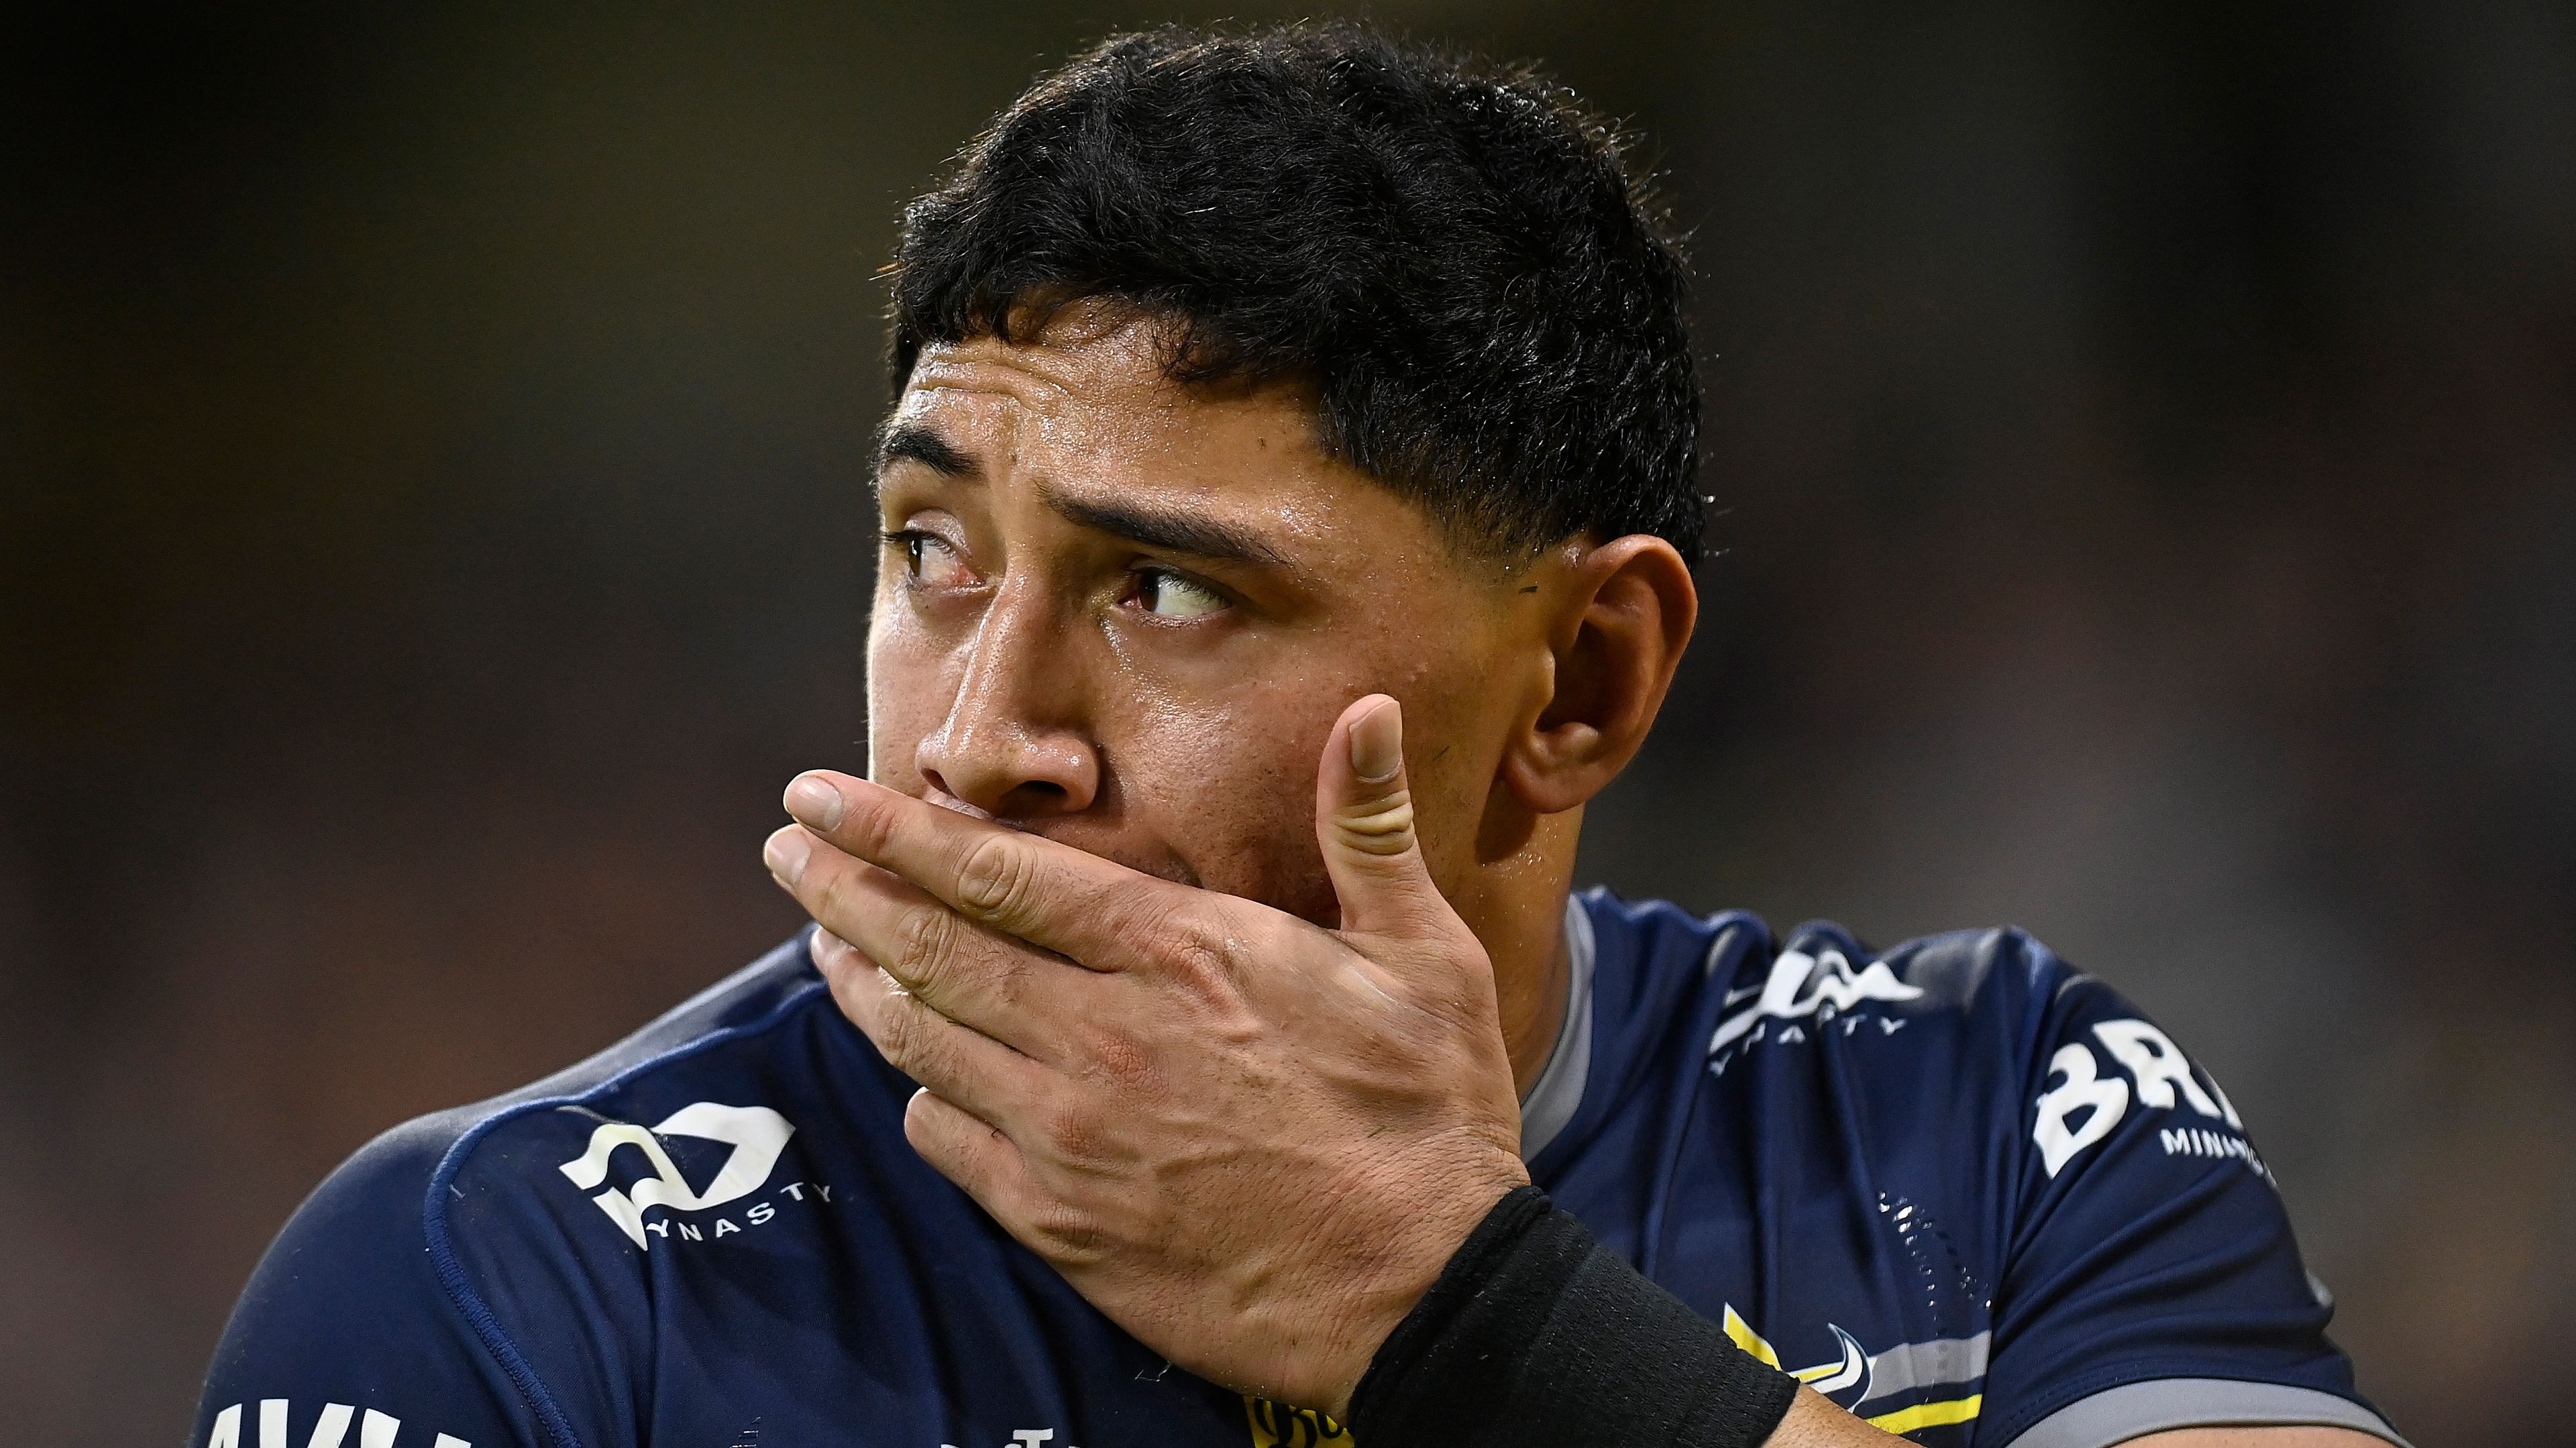 Jason Taumalolo of the Cowboys looks on during the round 18 NRL match between the North Queensland Cowboys and the Cronulla Sharks at Qld Country Bank Stadium, on July 15, 2022, in Townsville, Australia. (Photo by Ian Hitchcock/Getty Images)